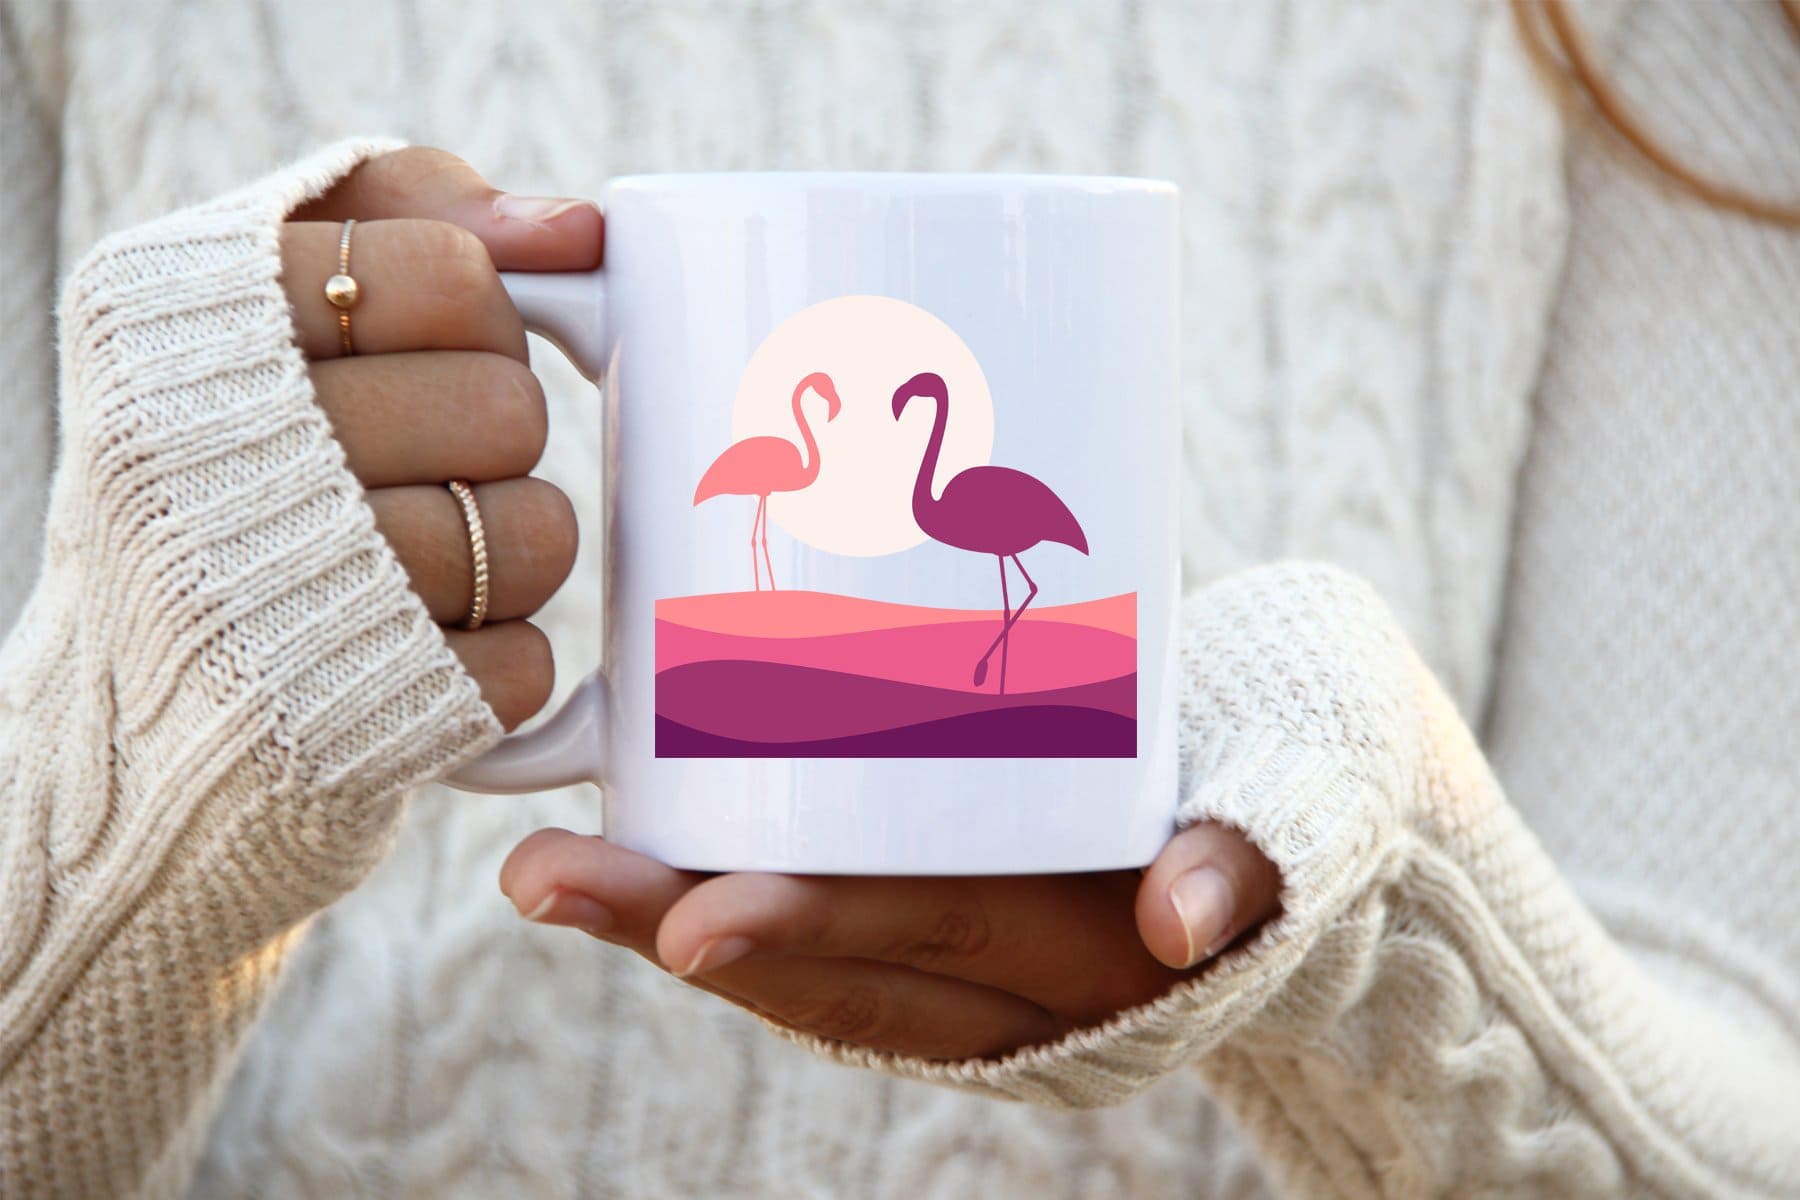 Pink flamingos are depicted on the white cup.